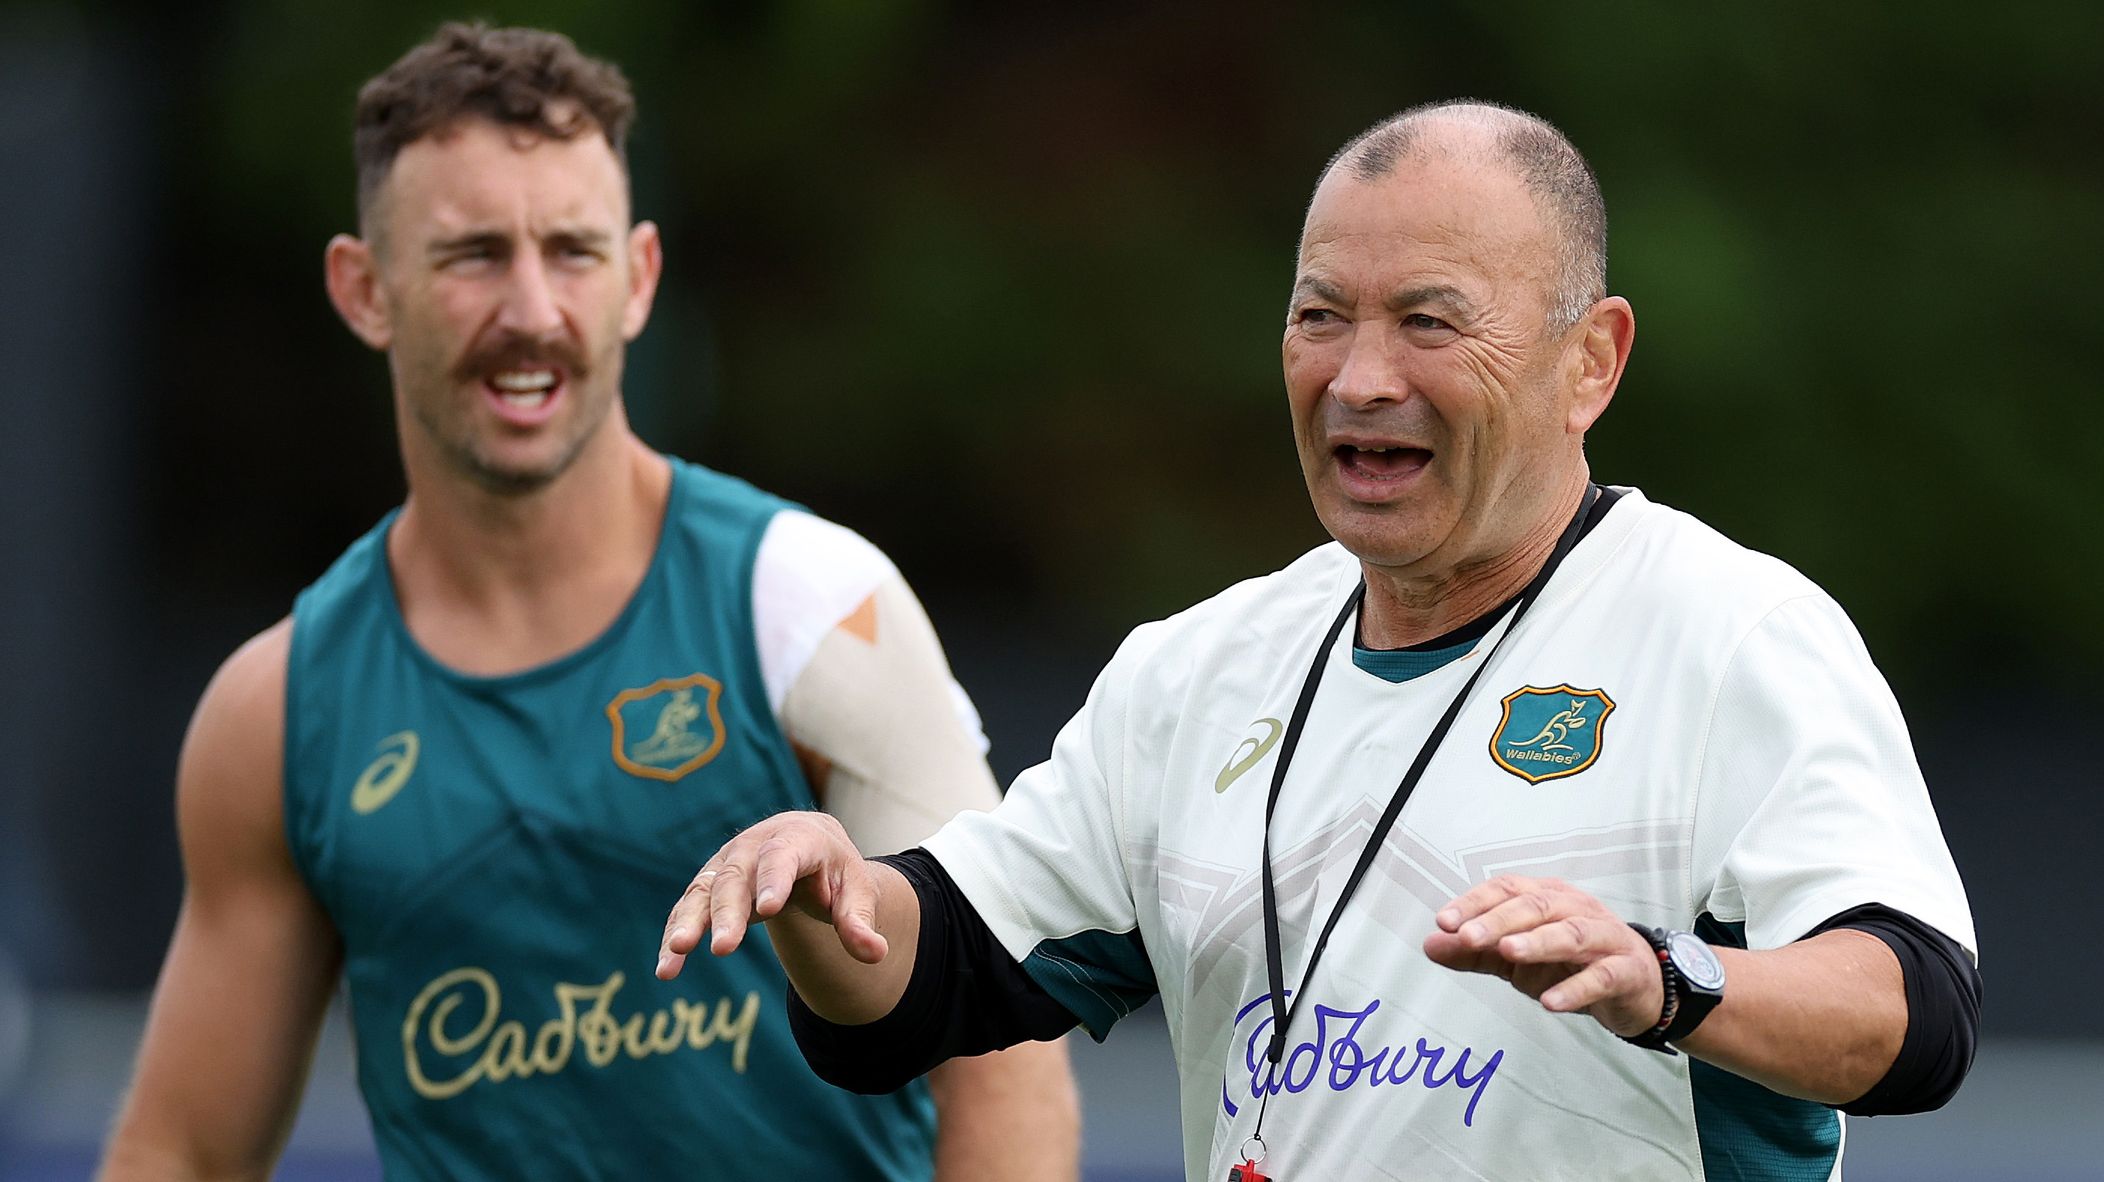 Wallabies coach Eddie Jones (right) with Nic White during a training session.